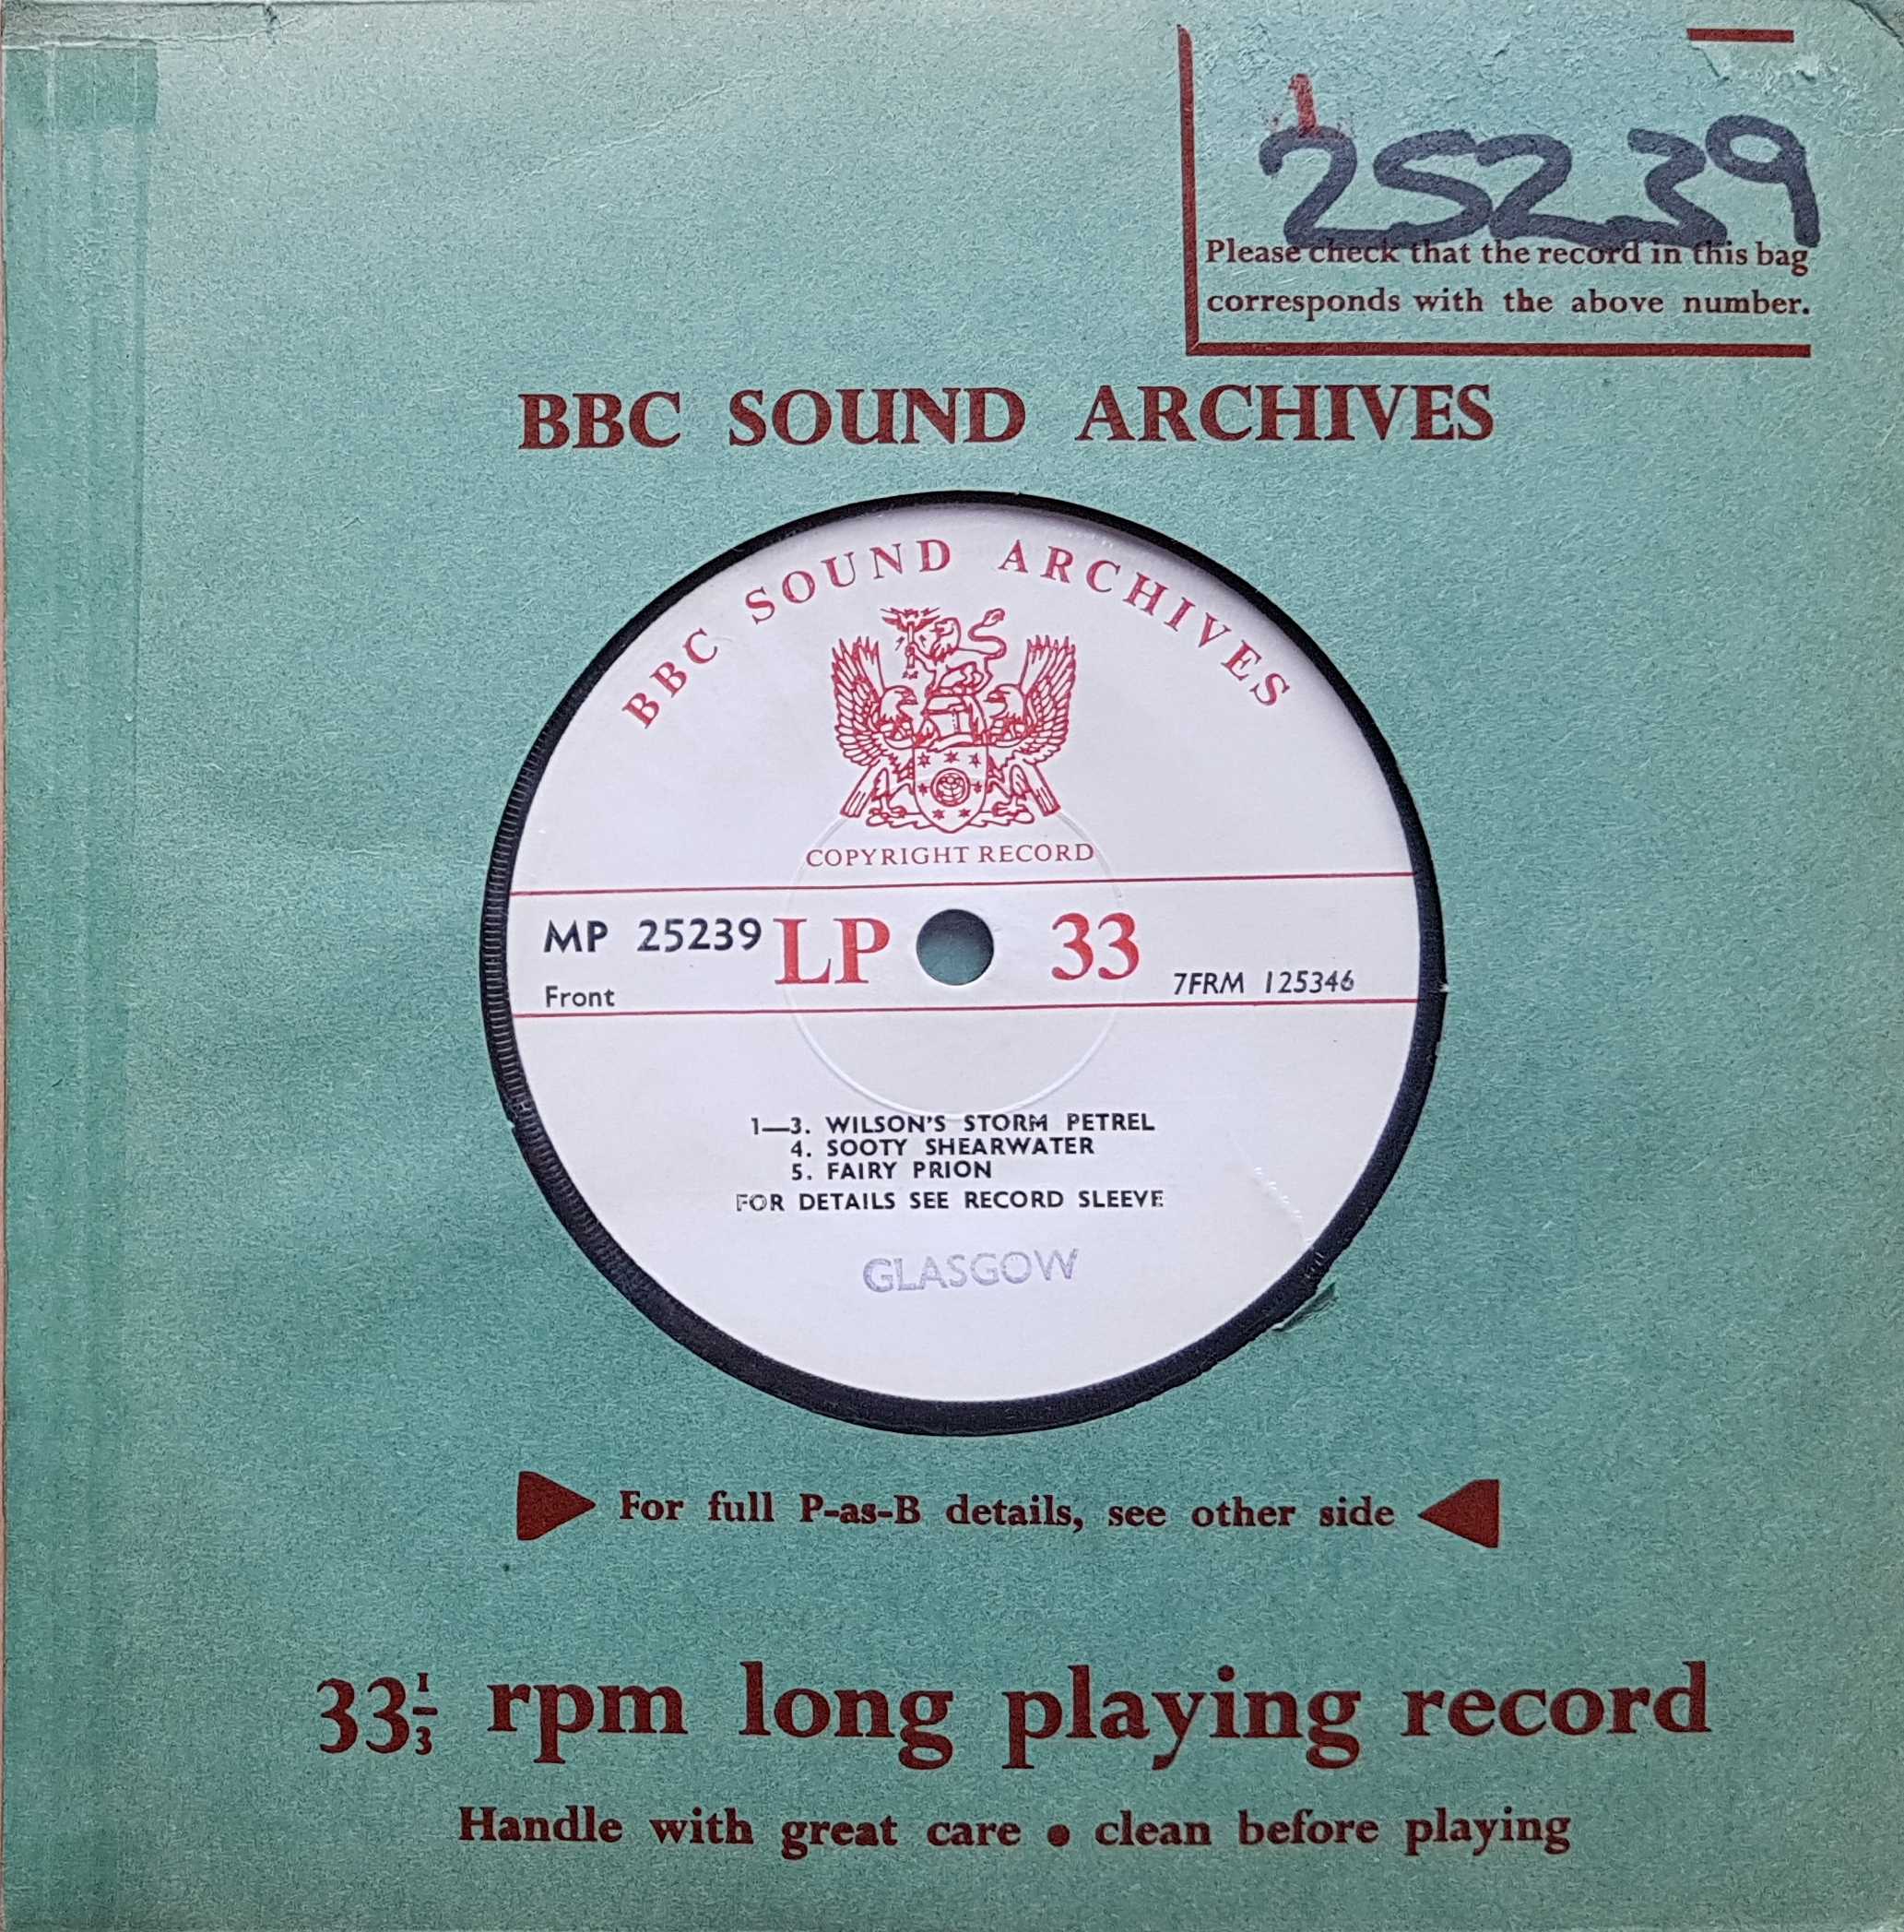 Picture of MP 25239 Animals by artist Not registered from the BBC singles - Records and Tapes library